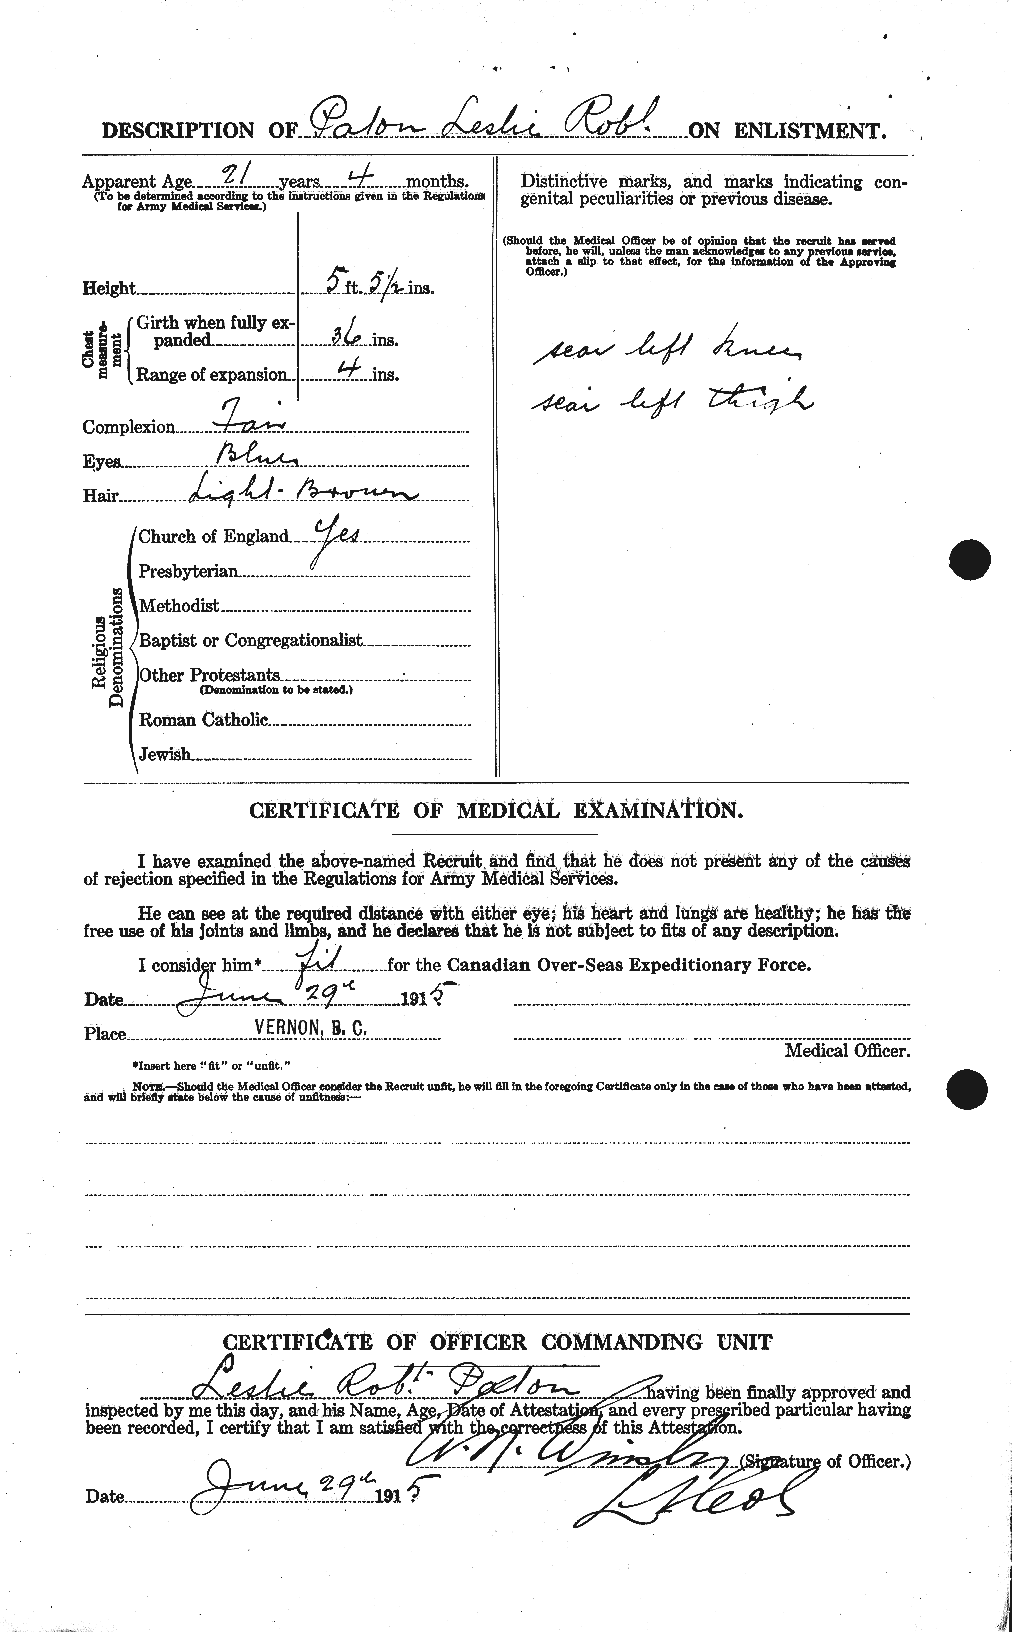 Personnel Records of the First World War - CEF 567940b